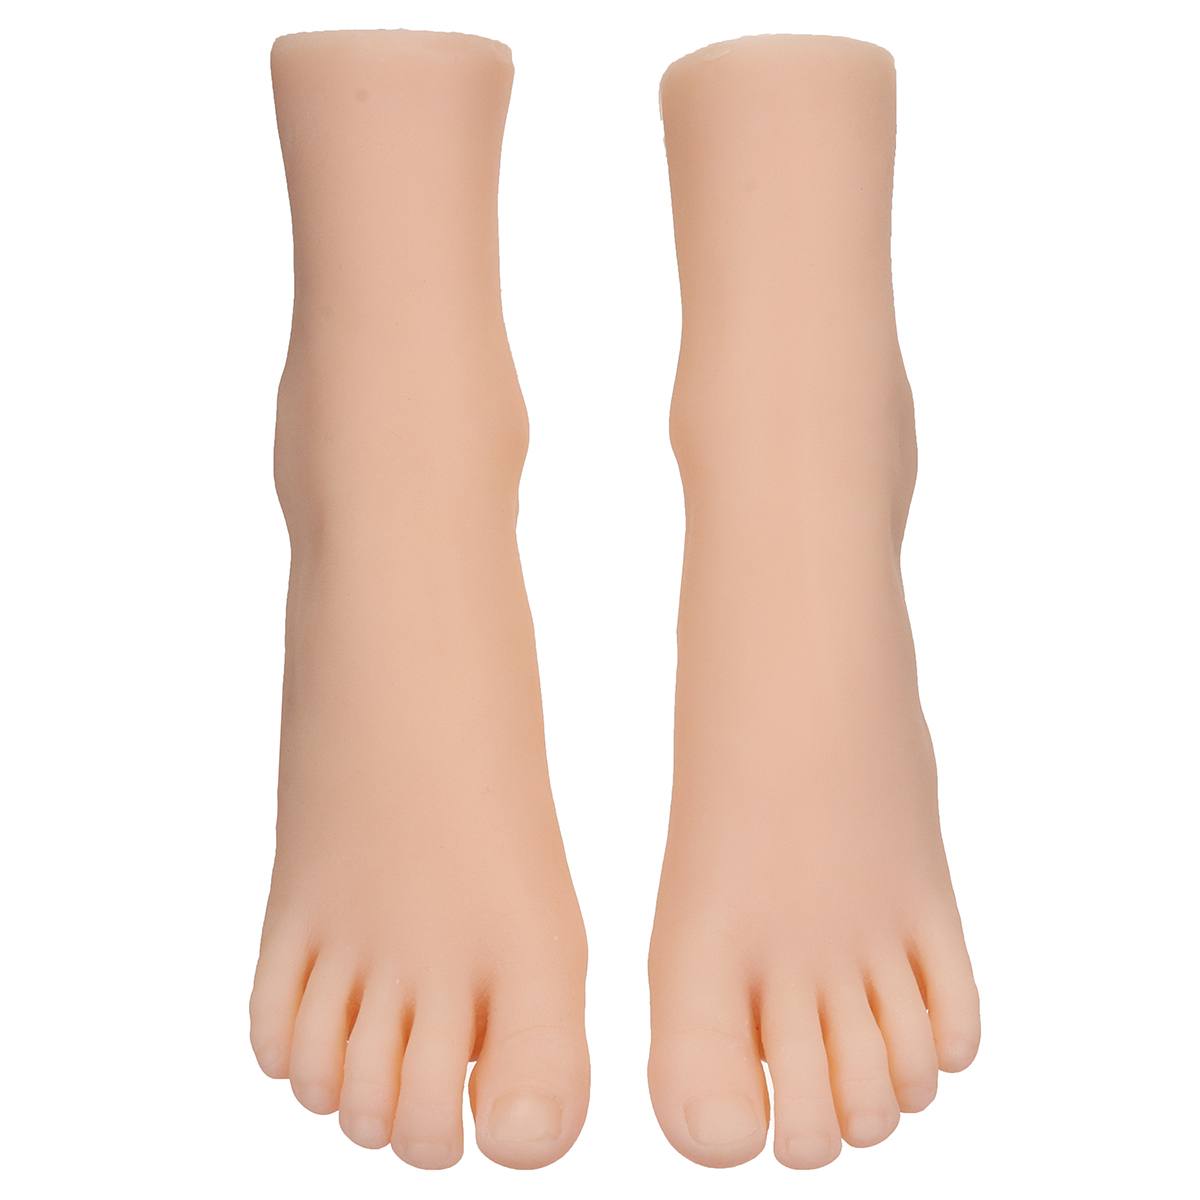 Lifelike Female Feet Shoes Displays Model Legs Mannequin Realistic Shoes Size 36 